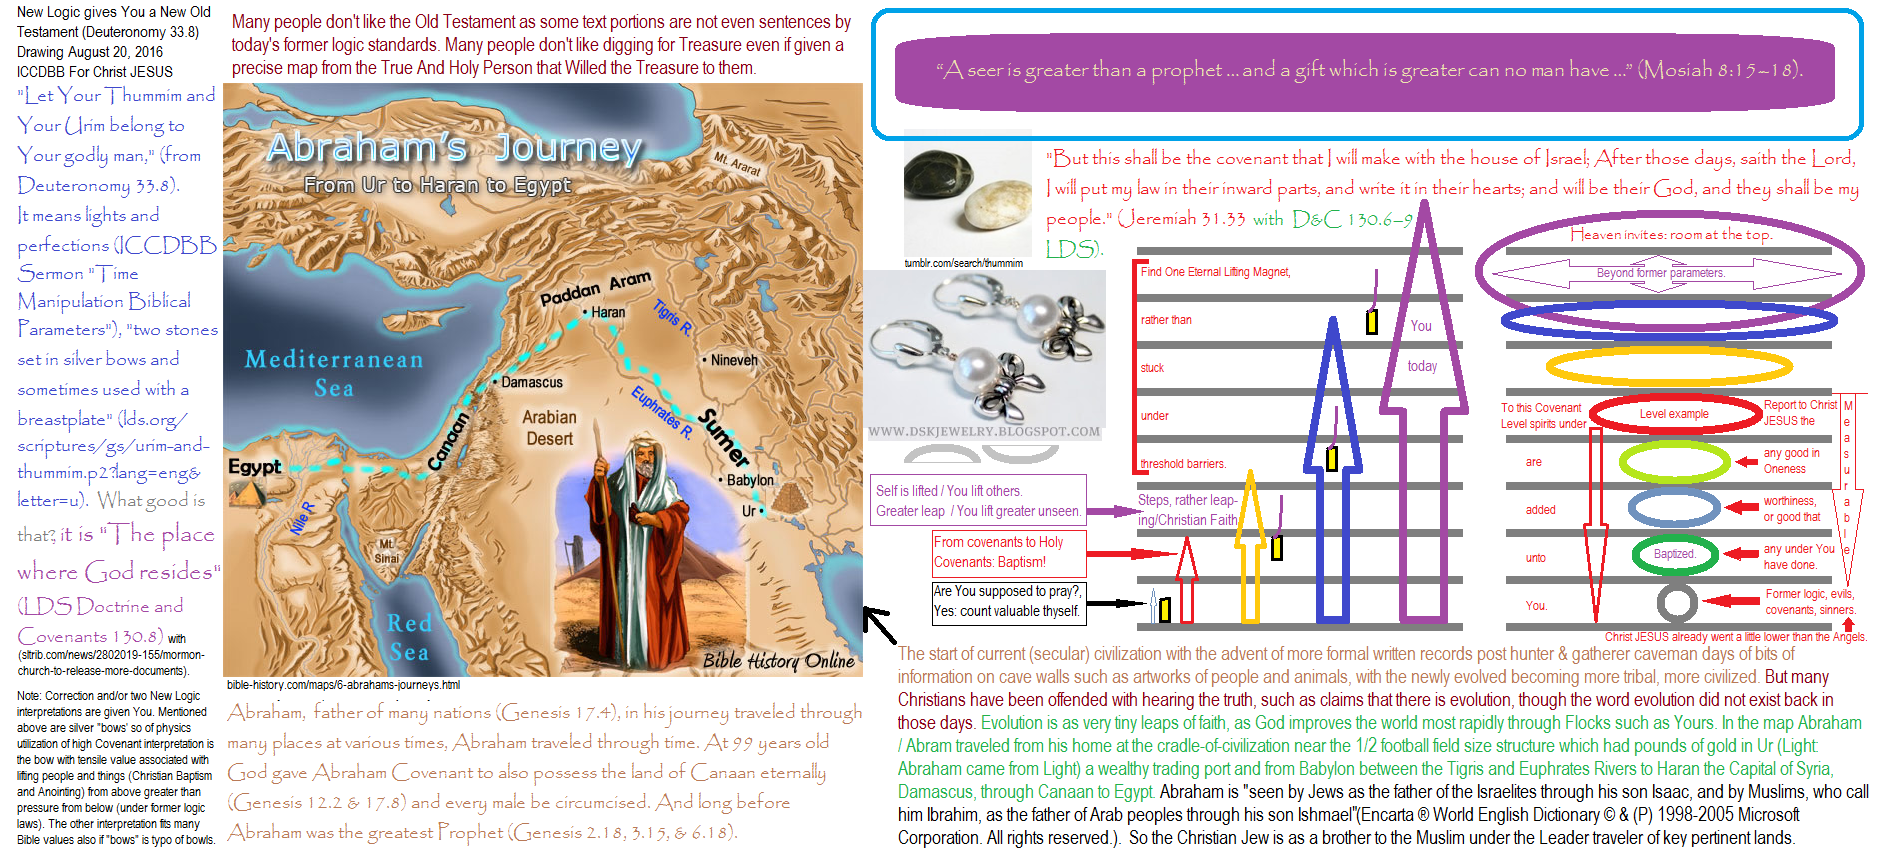 Abraham's journey from the city of Ur, light, Northwest of Kuwait and the Persian Guld, through the Holy Land into Egypt, map; with Urim and Thummin stones with Biblical illustrations of Covenant travels and time travel benefits: ICCDBB Sermon For Christ JESUS: how to 